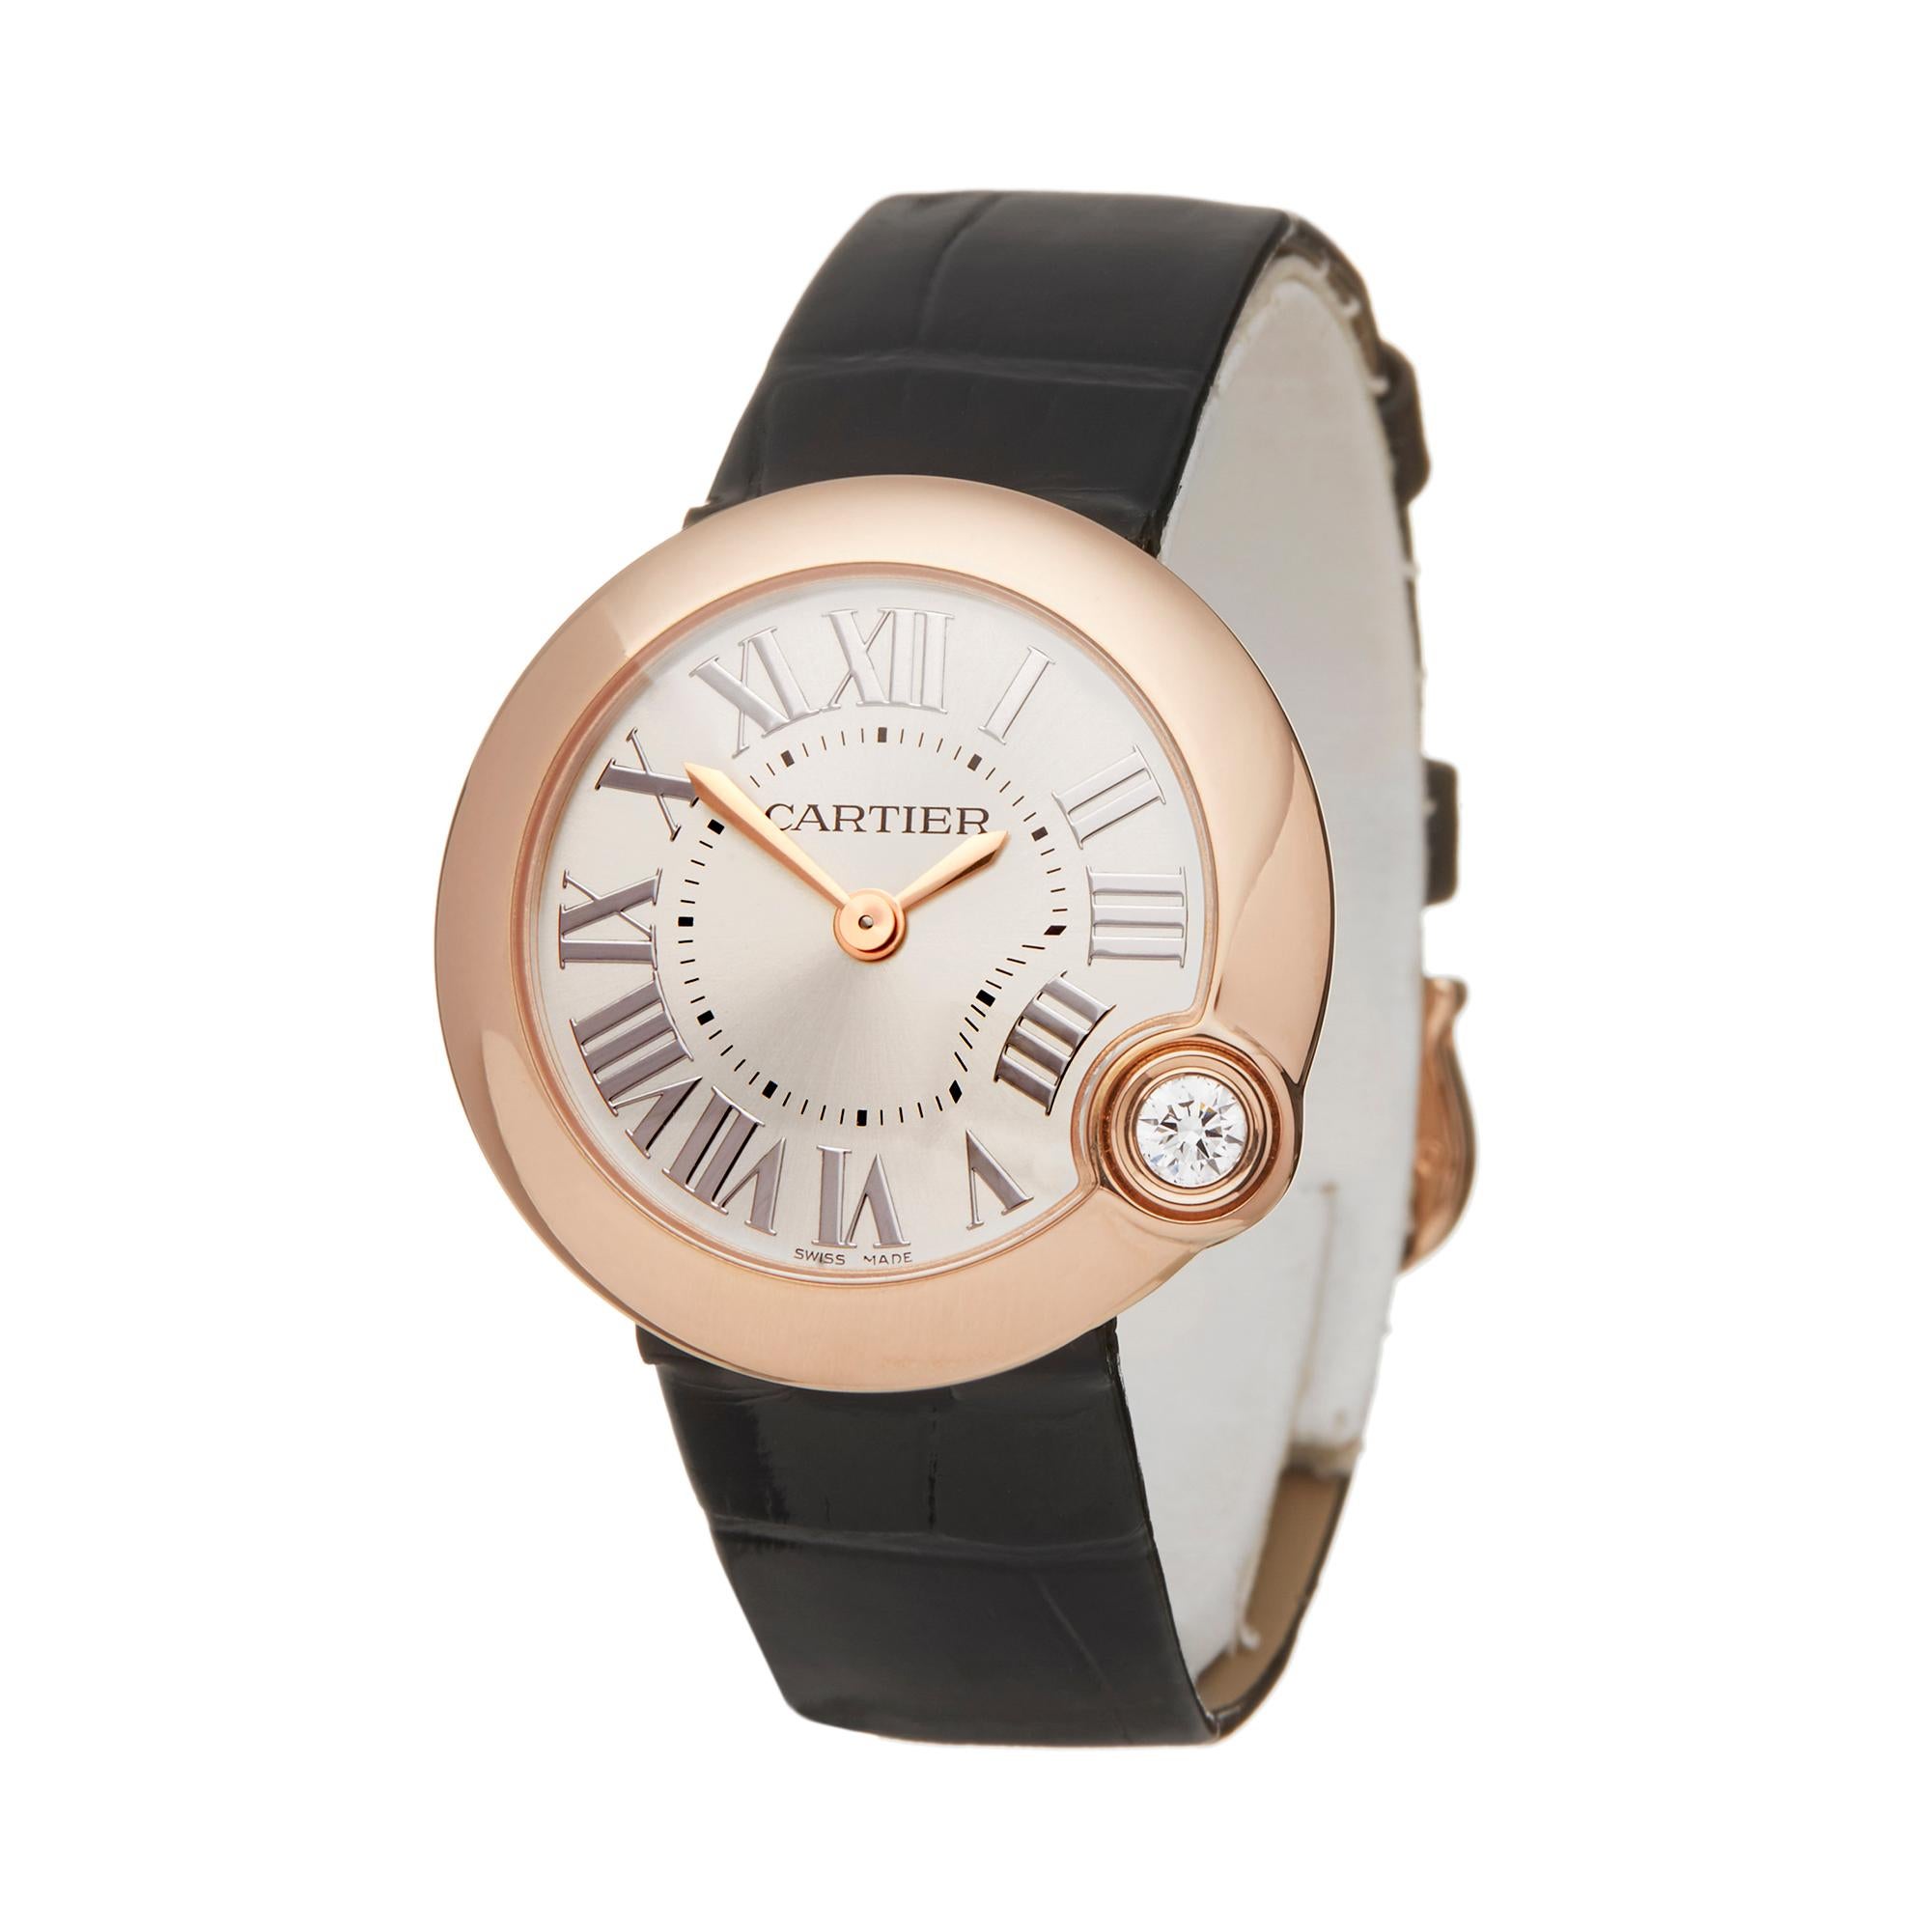 Reference: W5994
Manufacturer: Cartier
Model: Ballon Blanc
Model Reference: 4171 or WGBL0003
Date: 10th December 2018
Gender: Women's
Box and Papers: Box, Manuals and Guarantee
Dial: Silver Roman
Glass: Sapphire Crystal
Movement: Mechanical